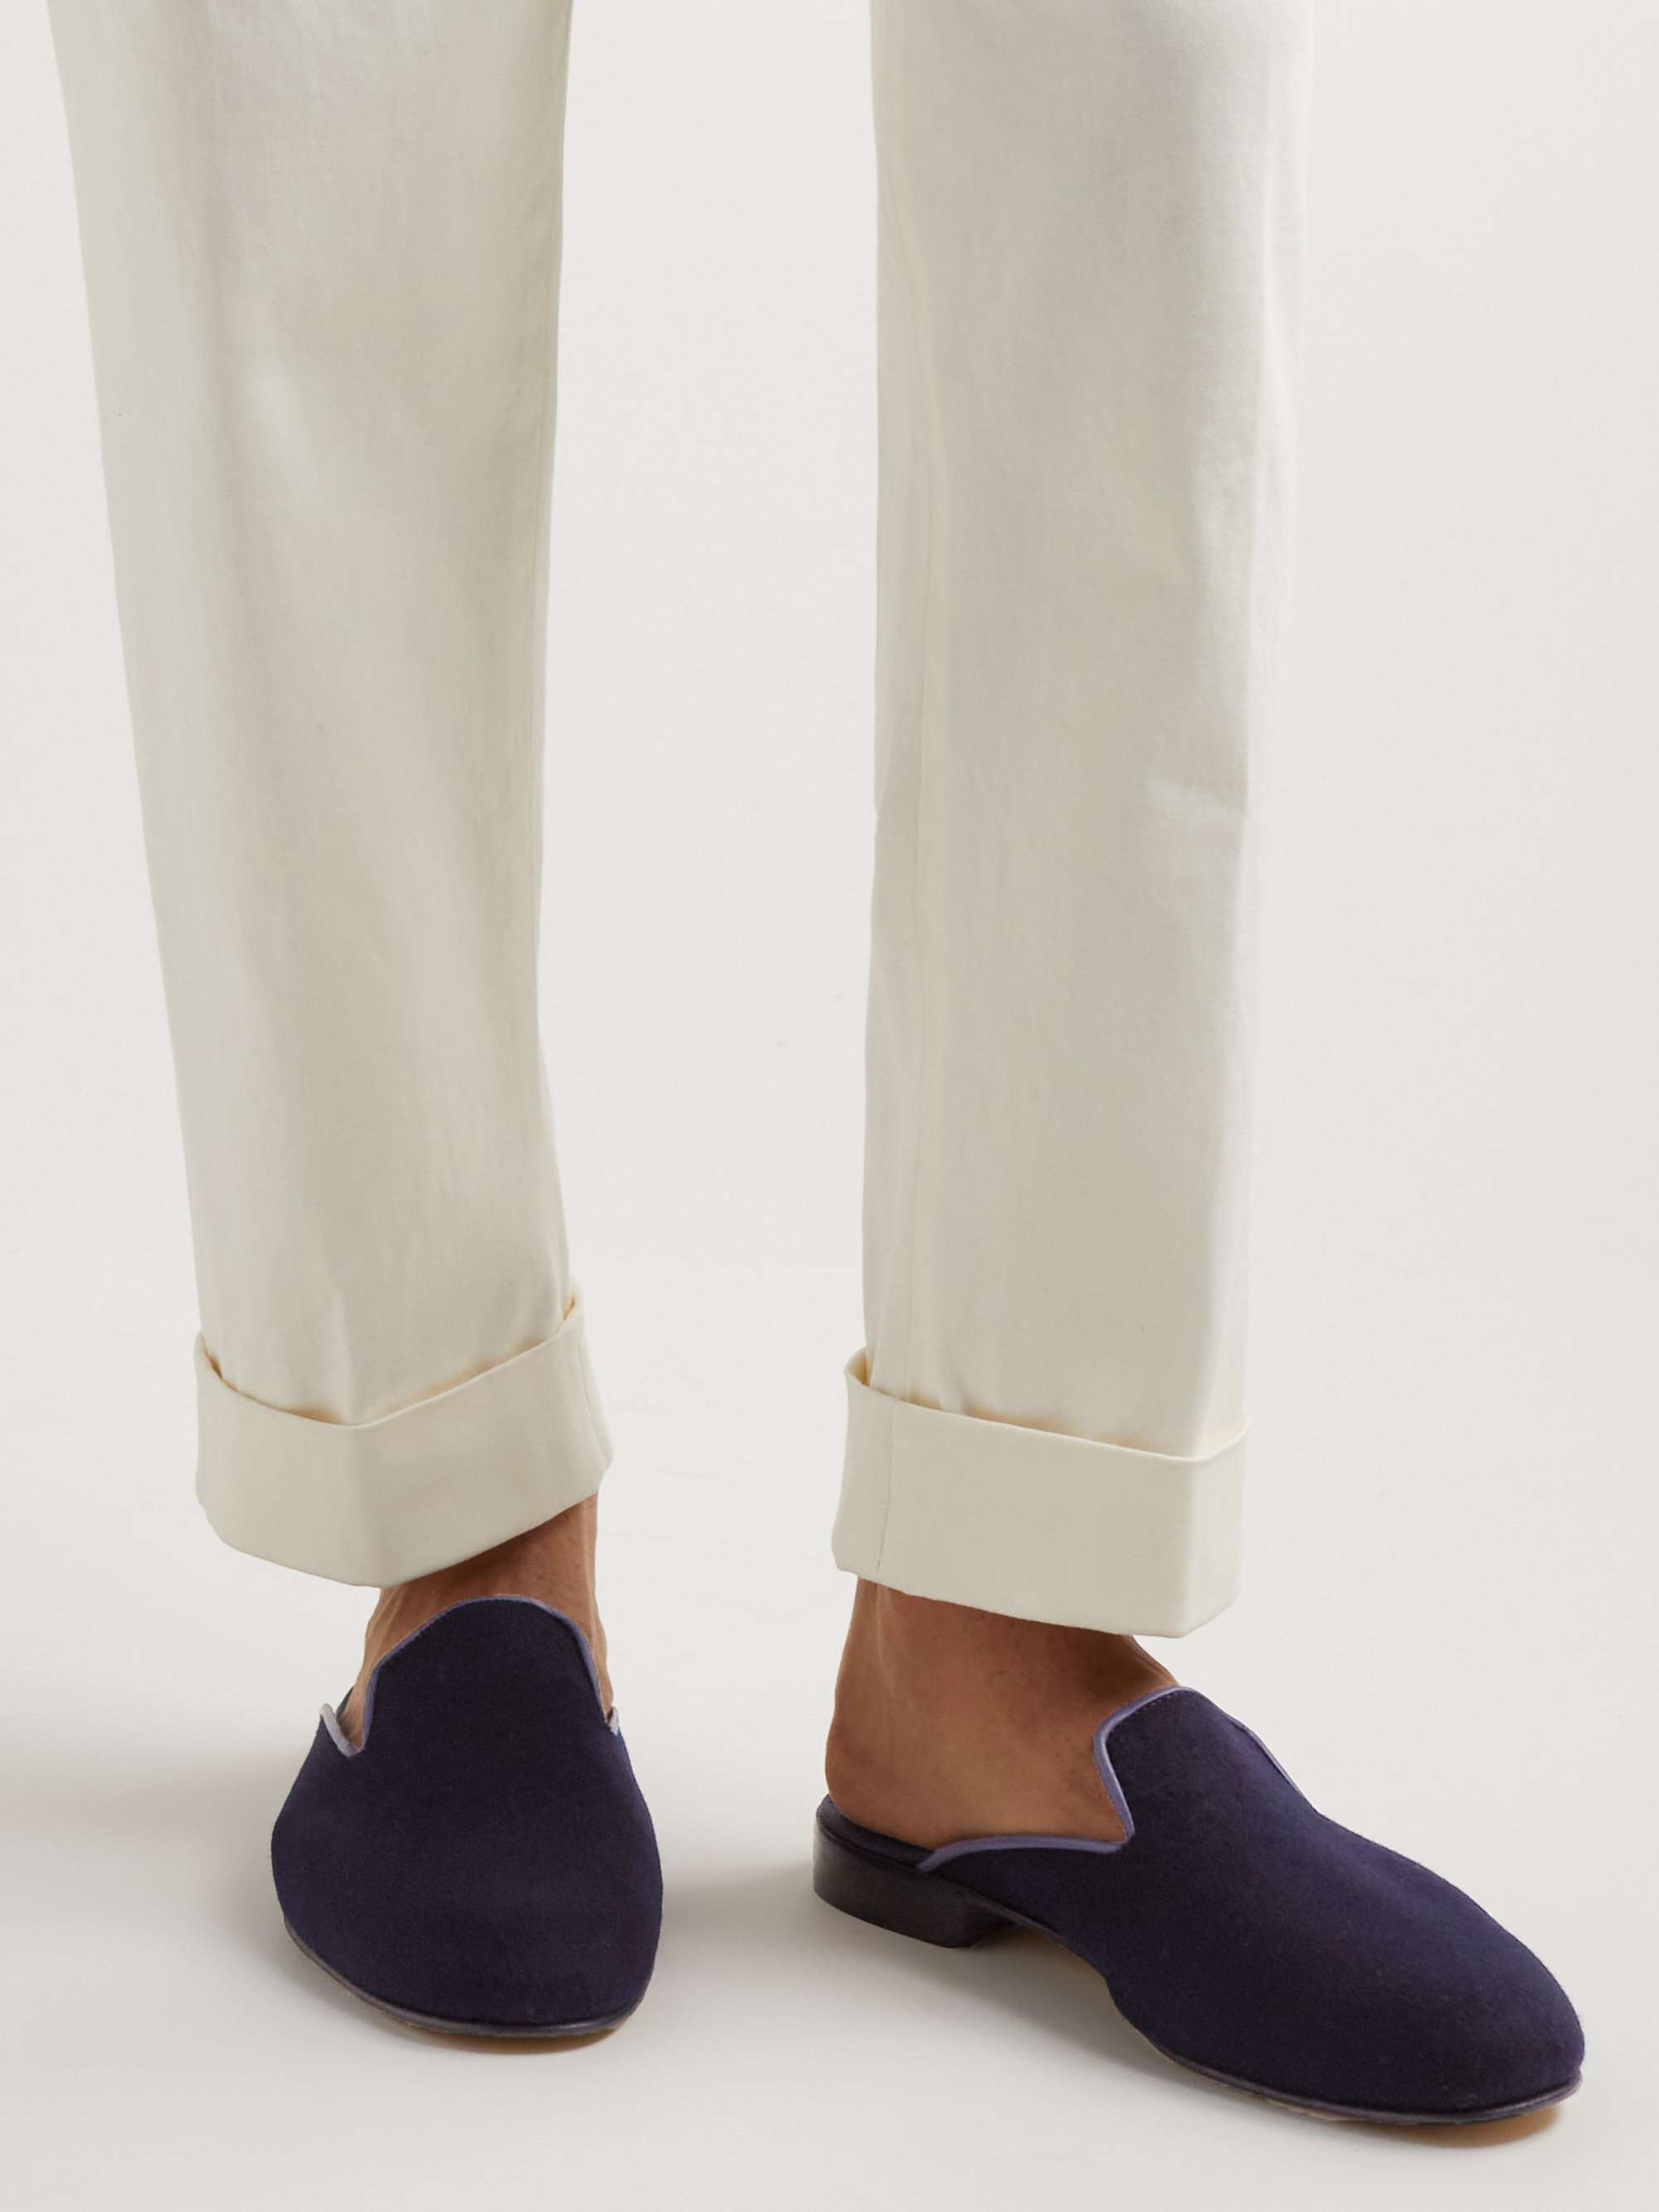 GEORGE CLEVERLEY Leather-Trimmed Cashmere Backless Loafers